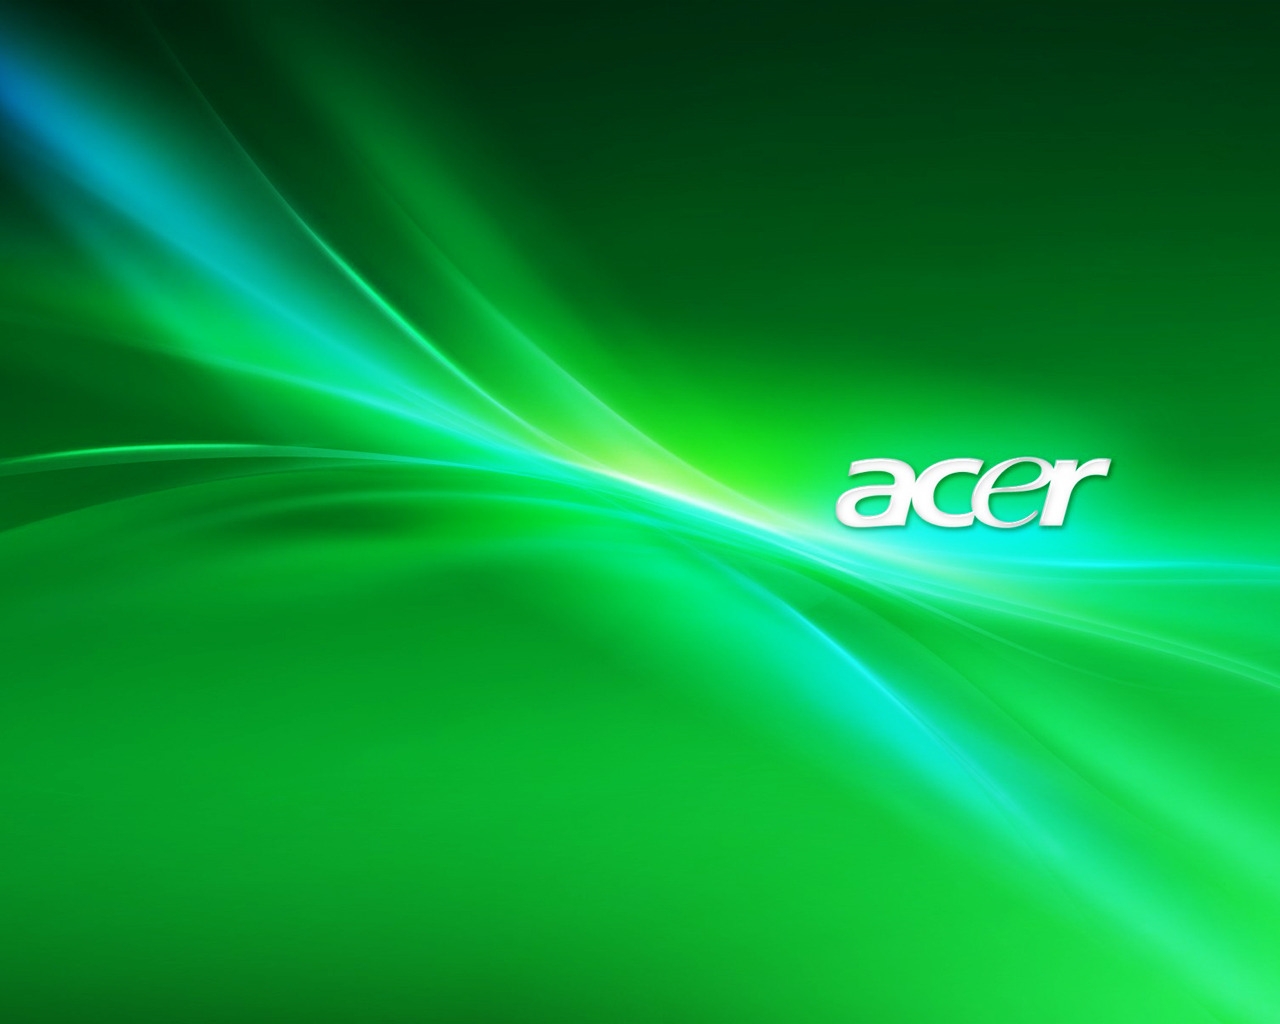 Acer Green for 1280 x 1024 resolution